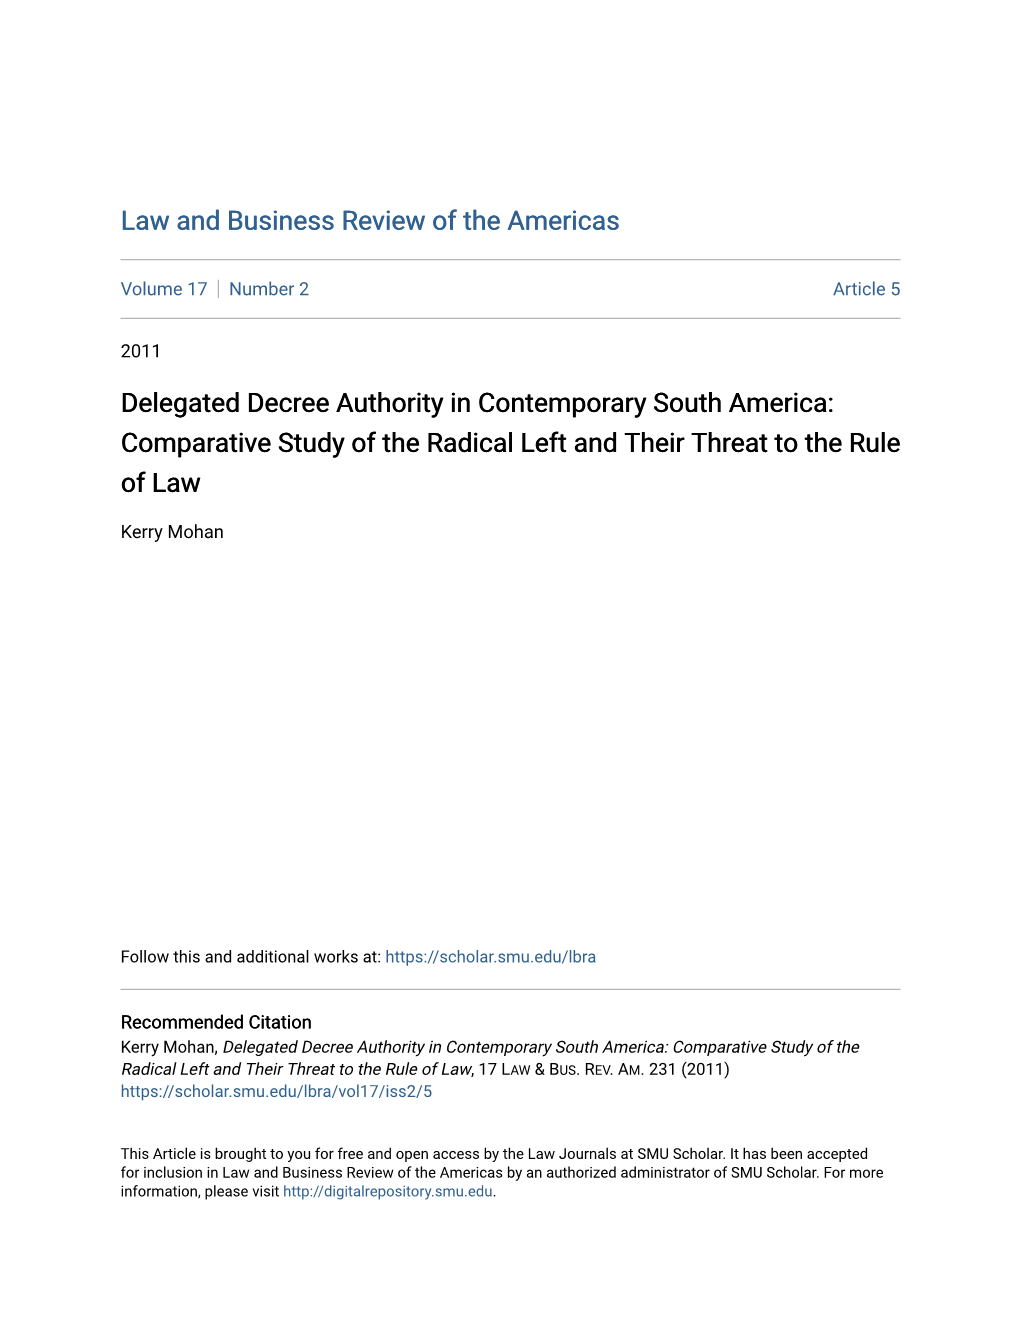 Delegated Decree Authority in Contemporary South America: Comparative Study of the Radical Left and Their Threat to the Rule of Law